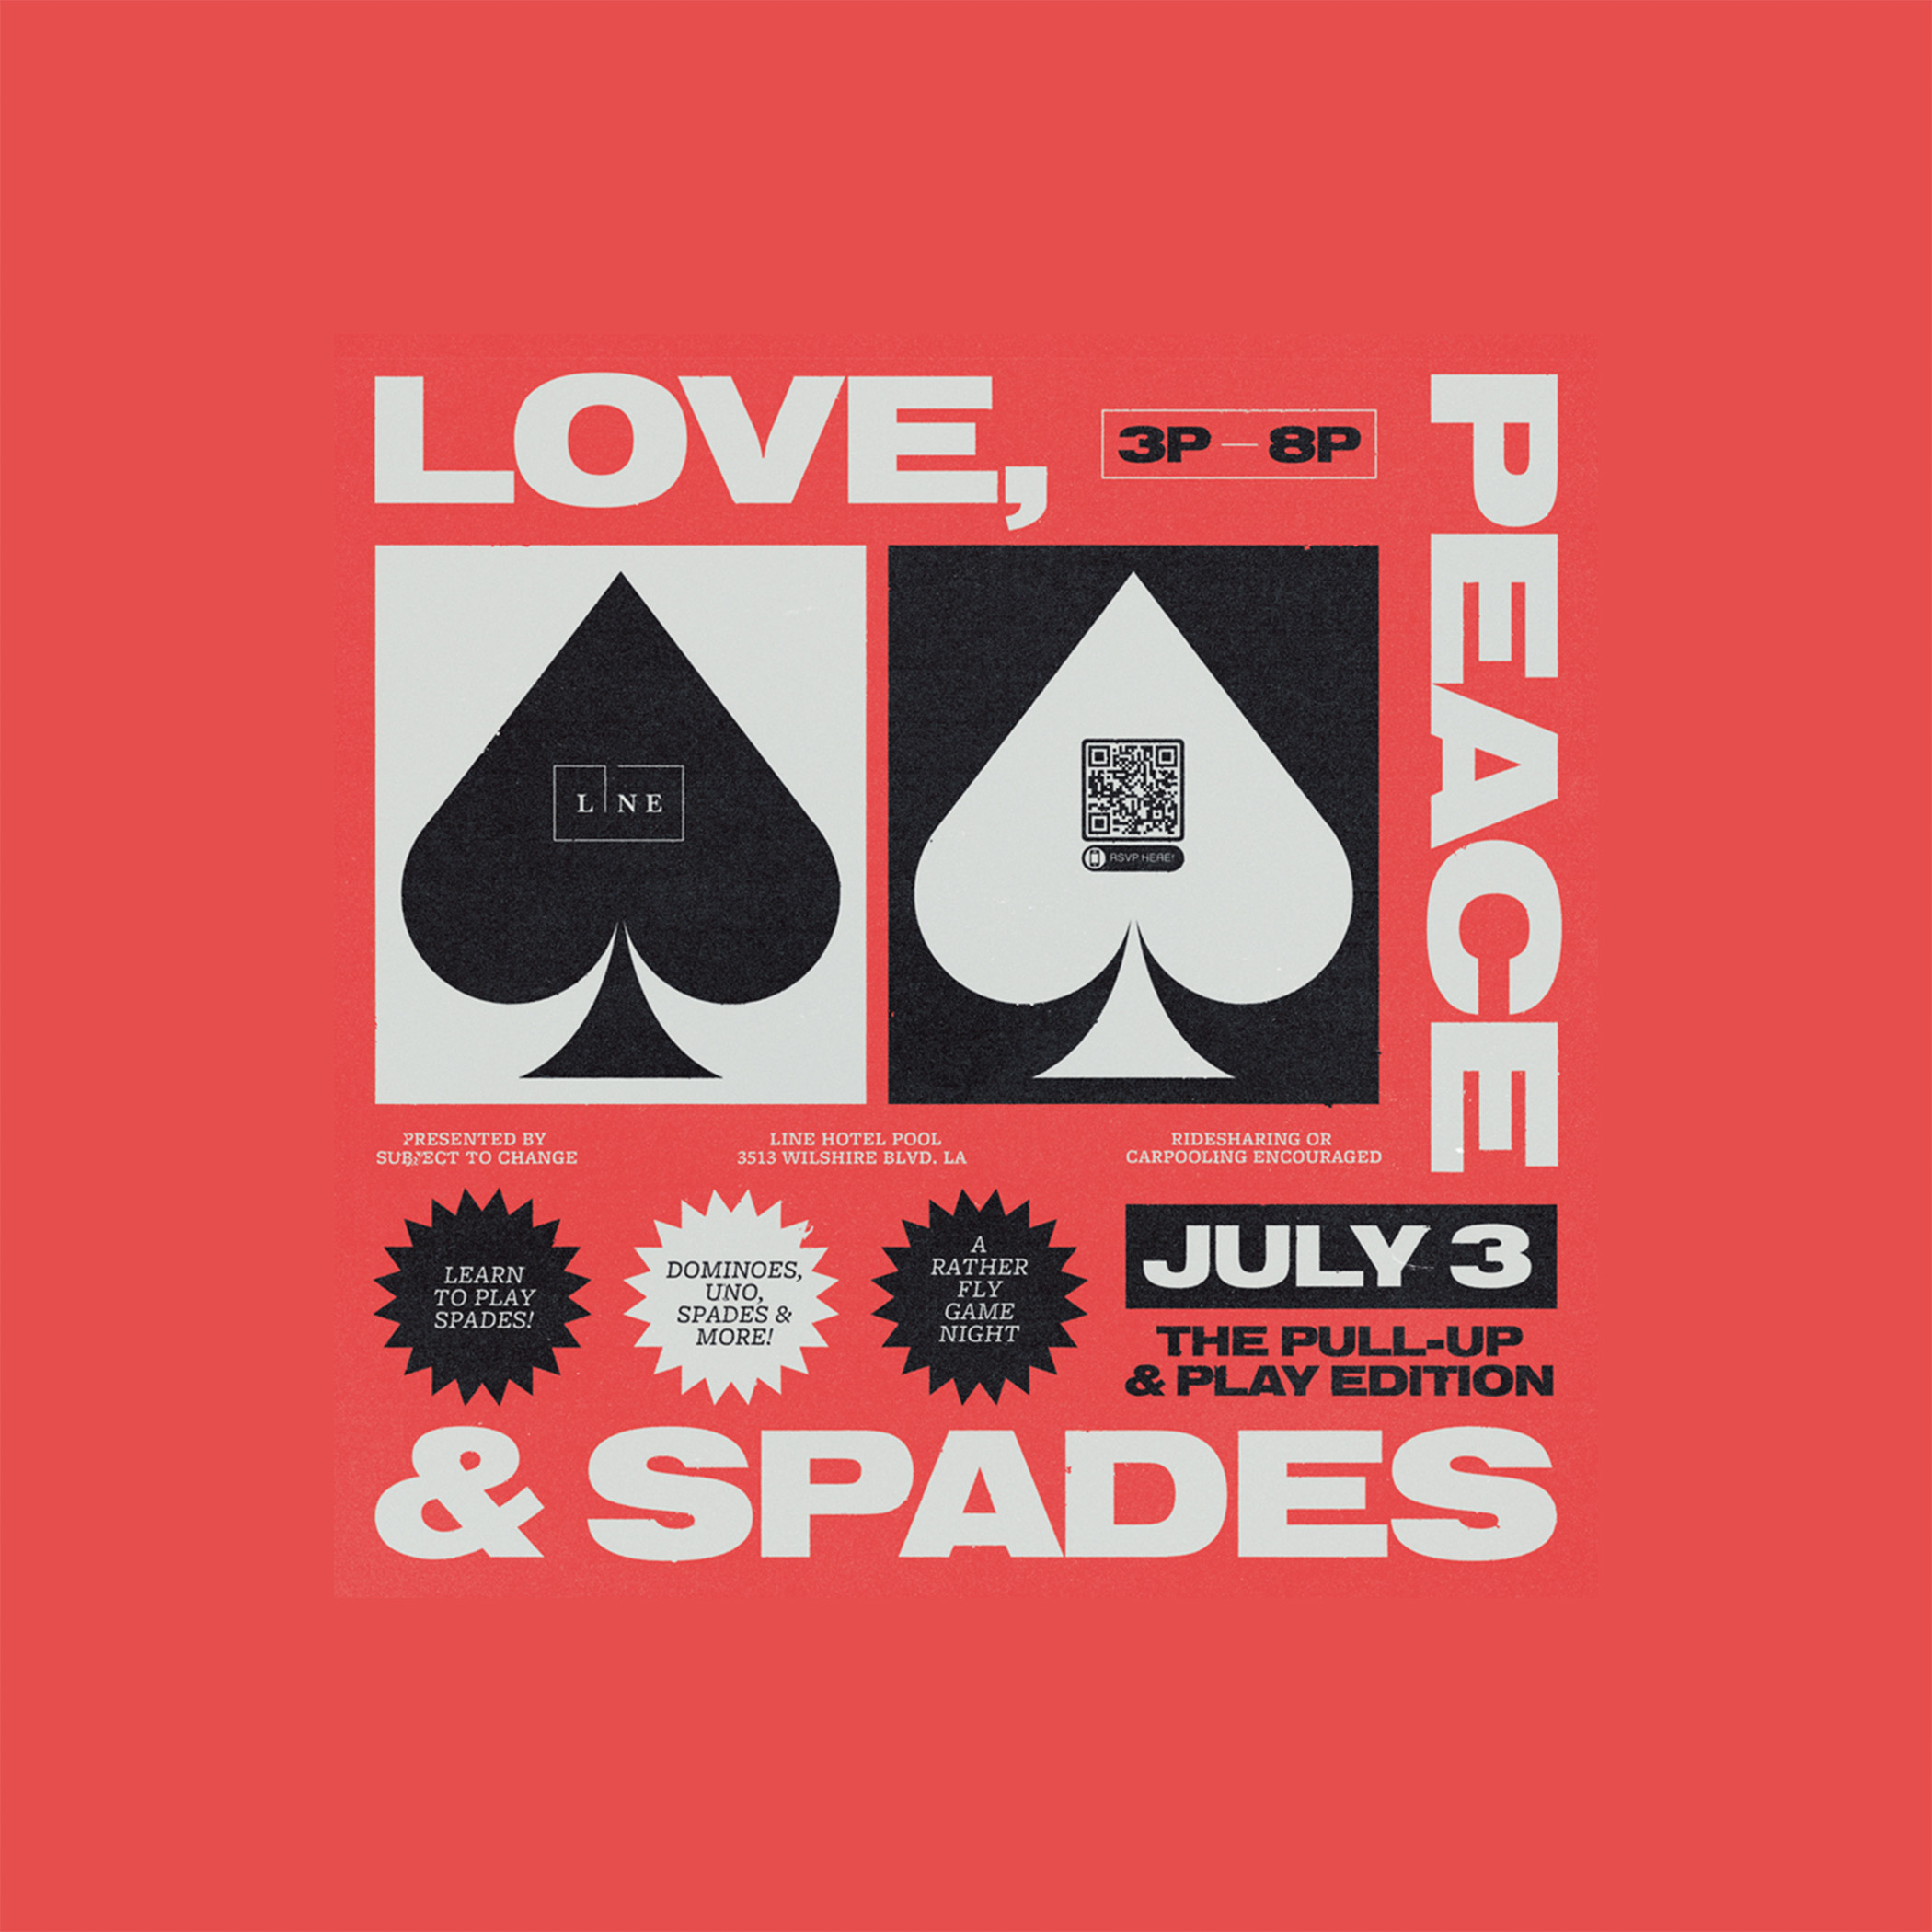 07.03.23-Love, Peace & Spades: Oull Up & Play Edition